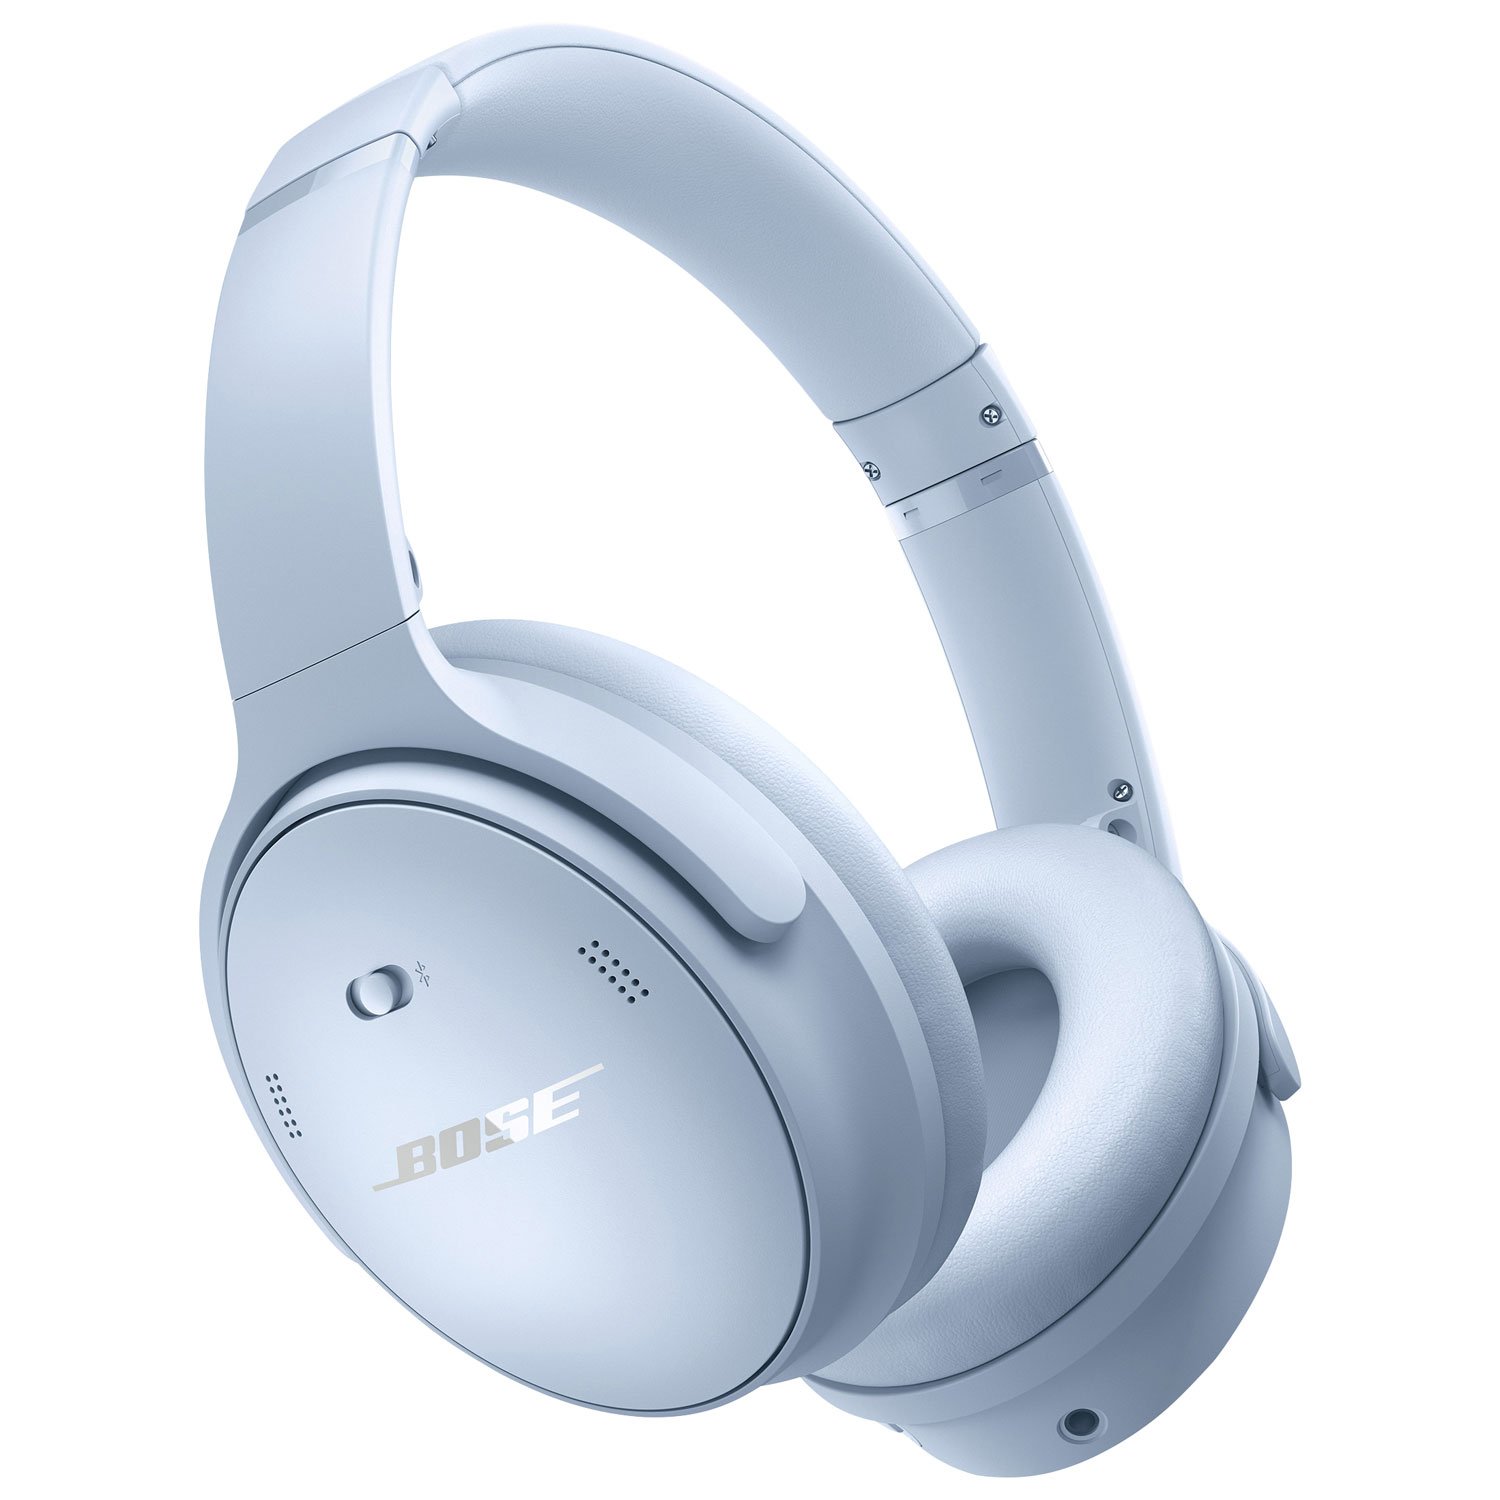 Bose QuietComfort Over-Ear Noise Cancelling Bluetooth Headphones - Moonstone Blue